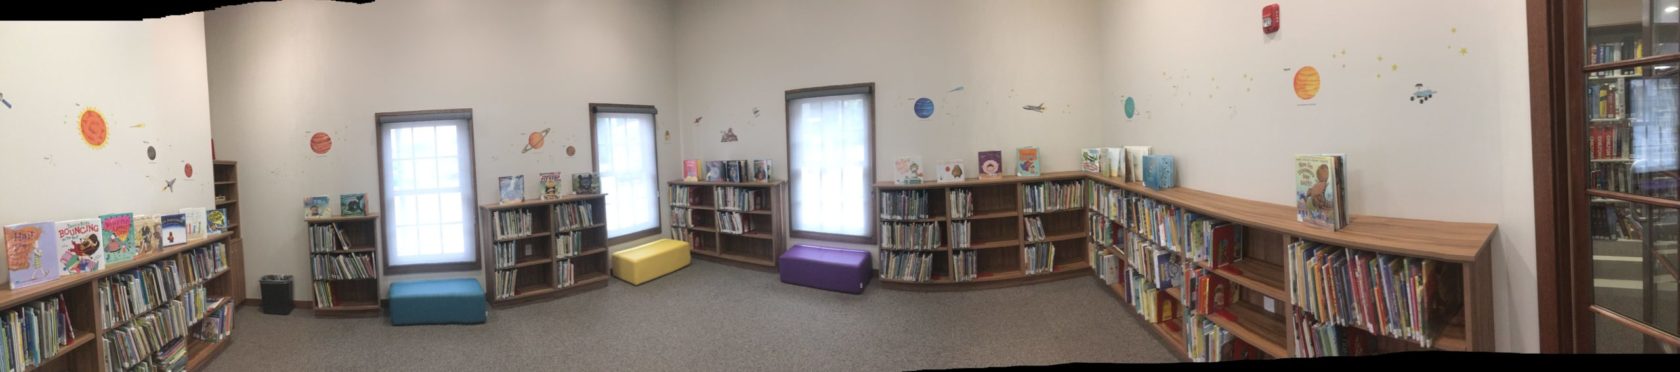 0925 Hardy County Public Library Panorama of Children's Area